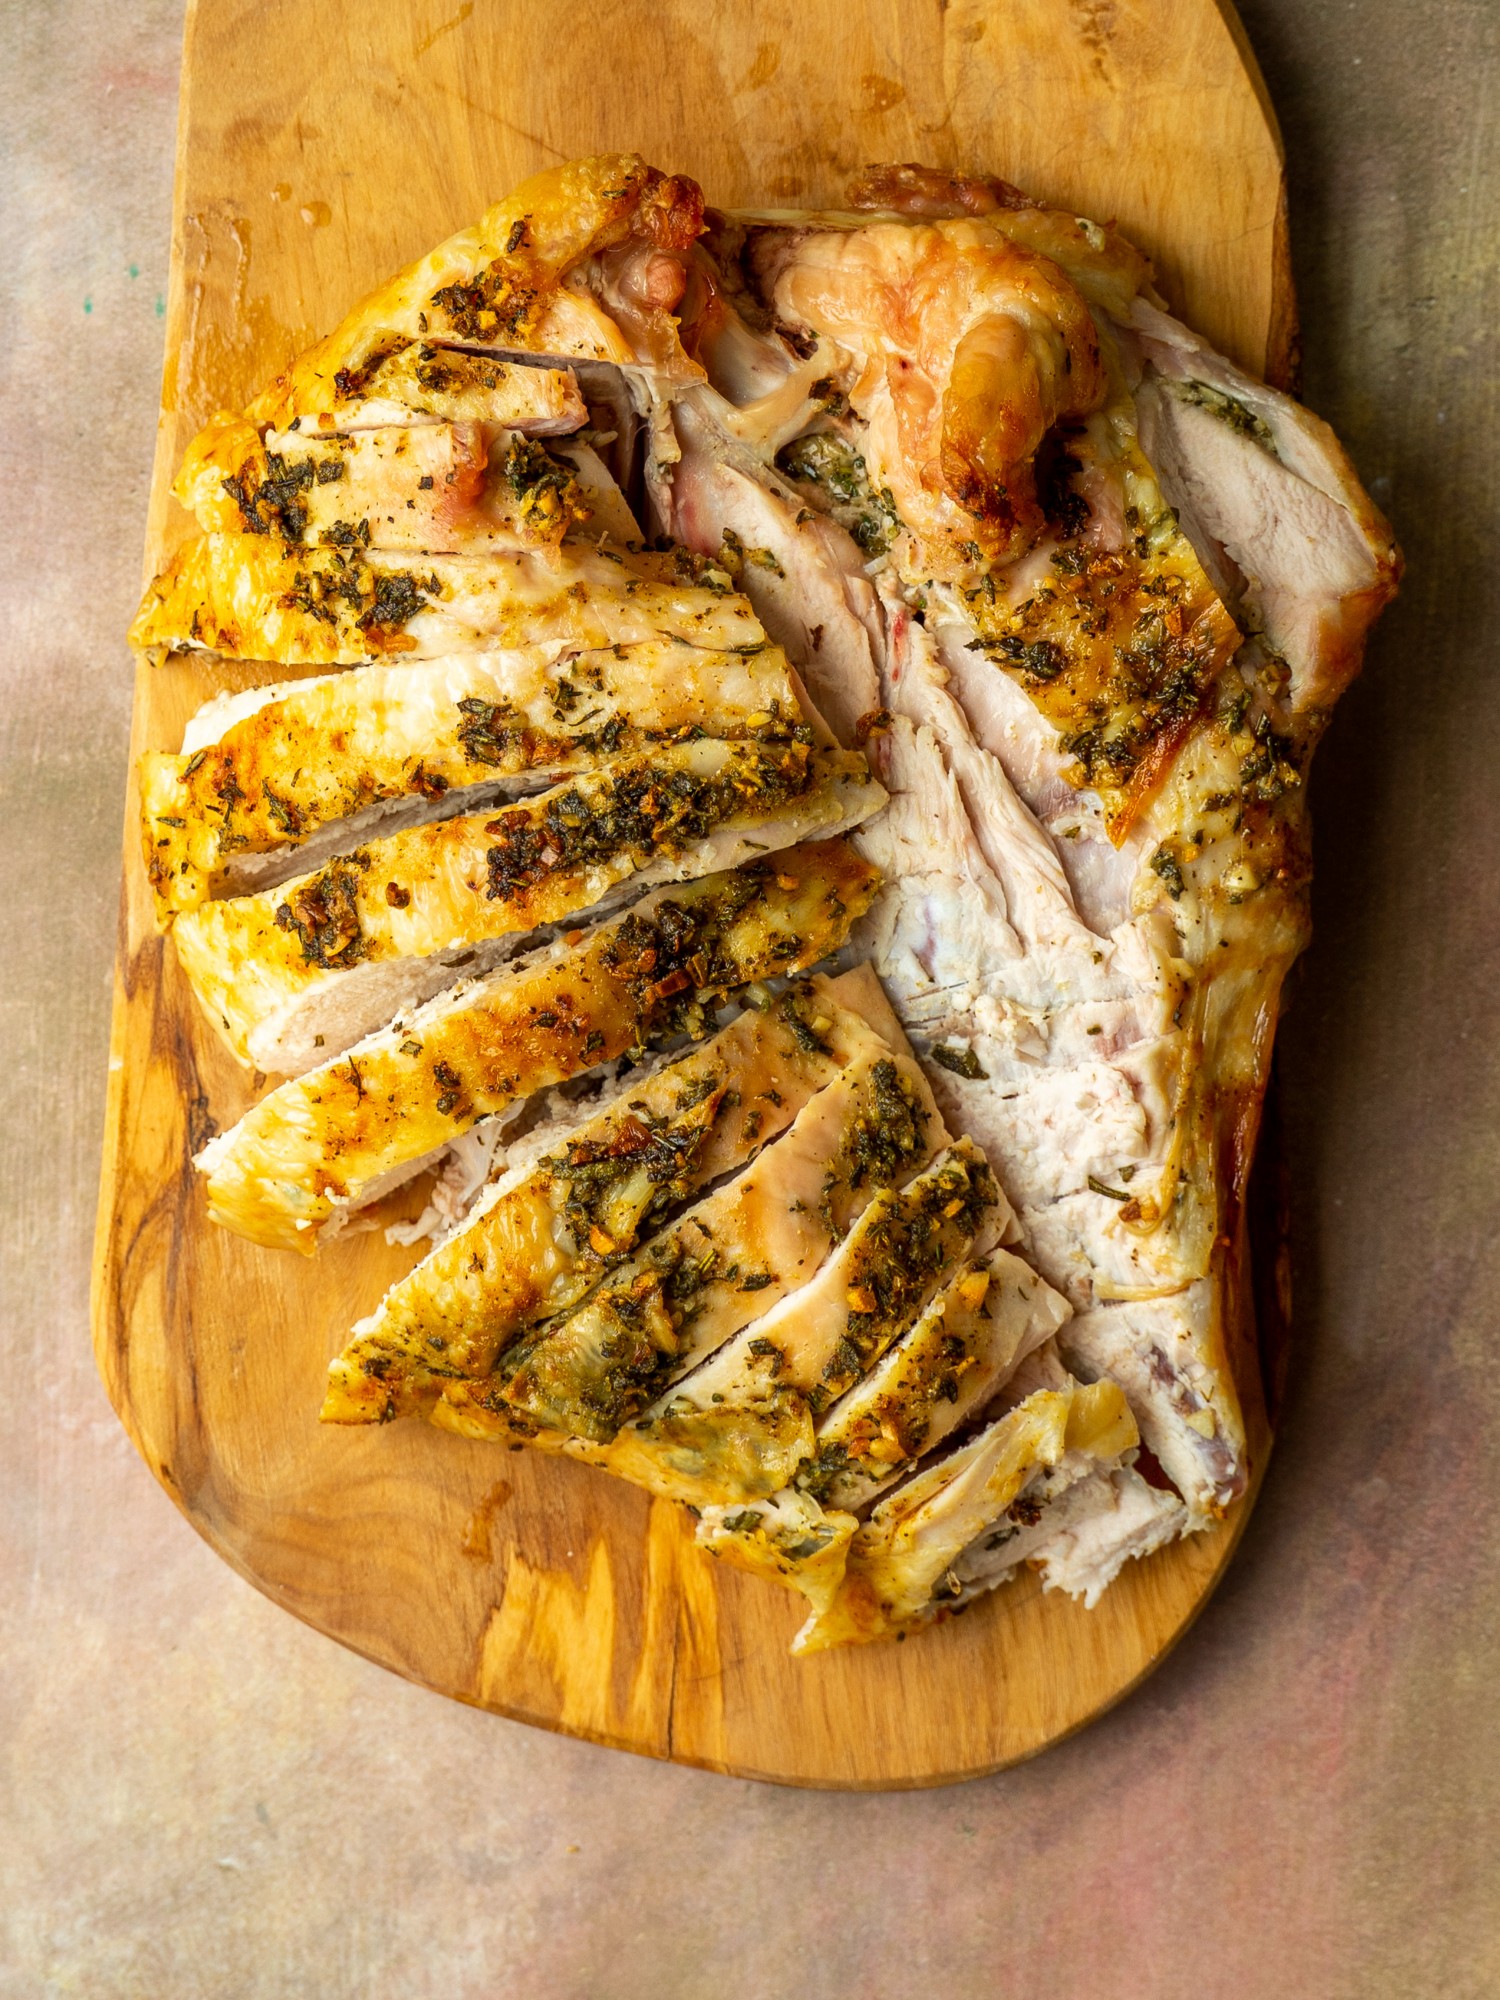 Whole Foods Market Oven Roasted Turkey Breast: Nutrition & Ingredients